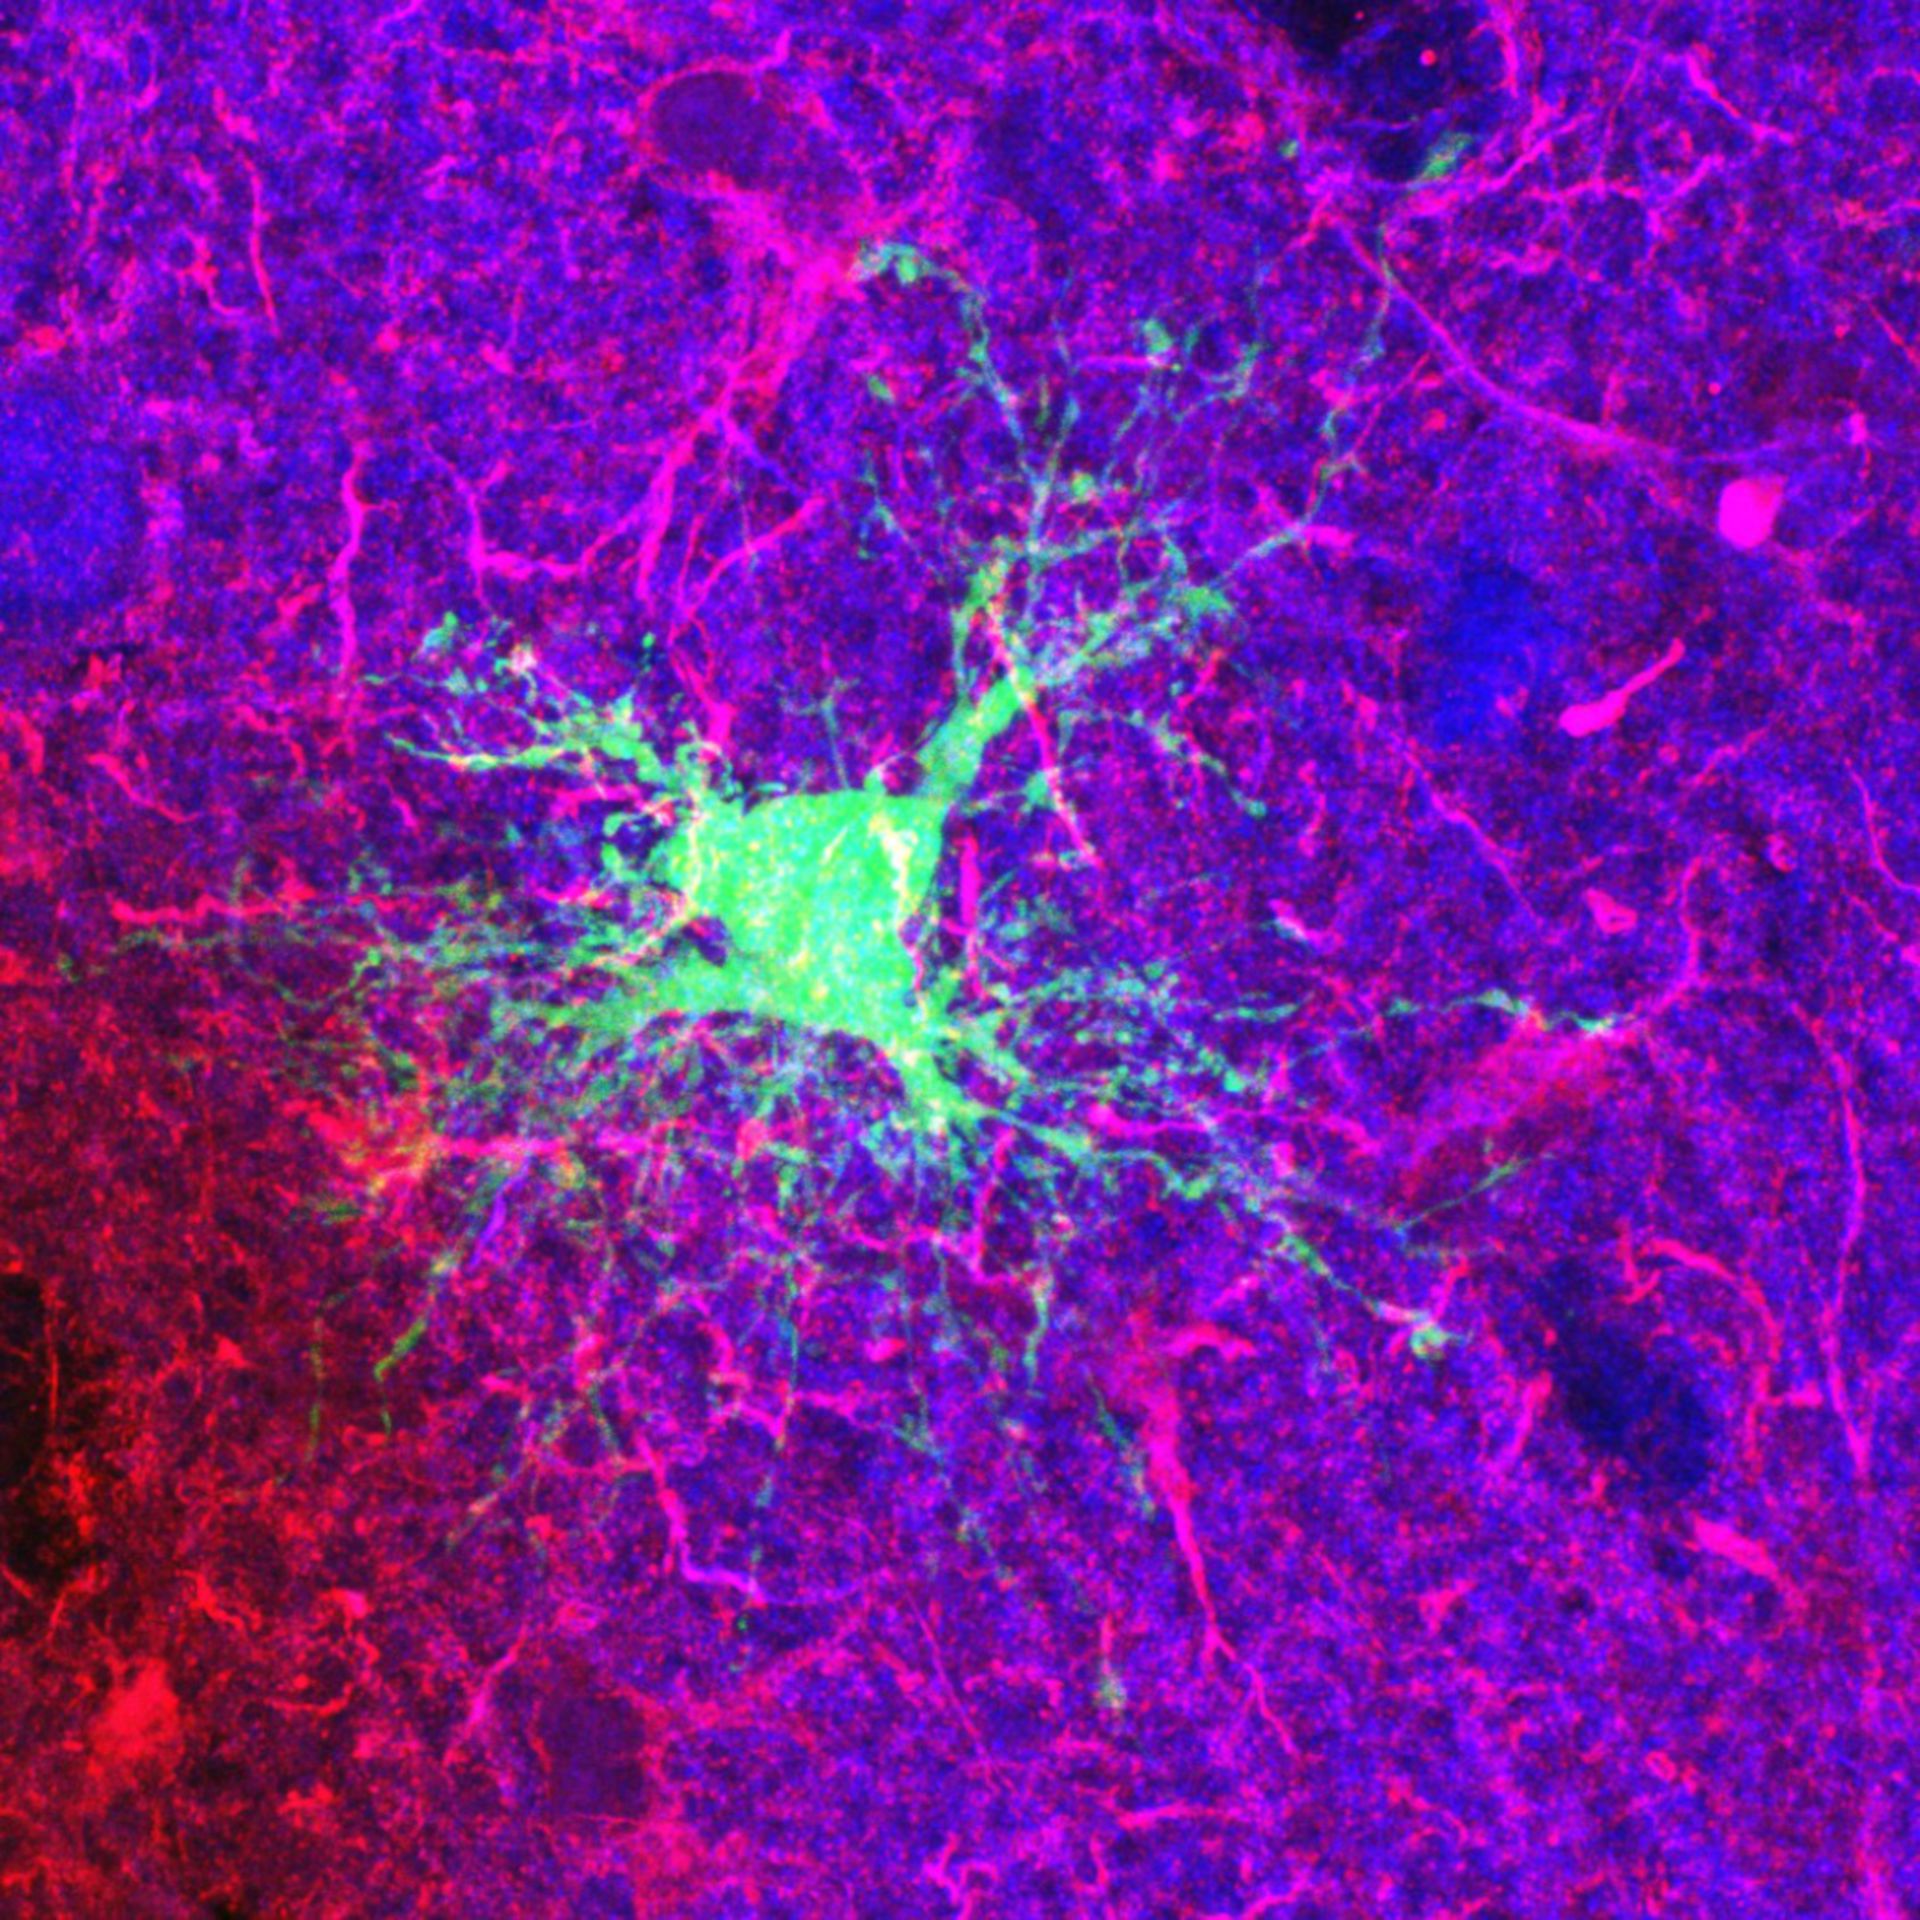 Astrocytes! - Image of the Week - July 13, 2015 - CIL:47041